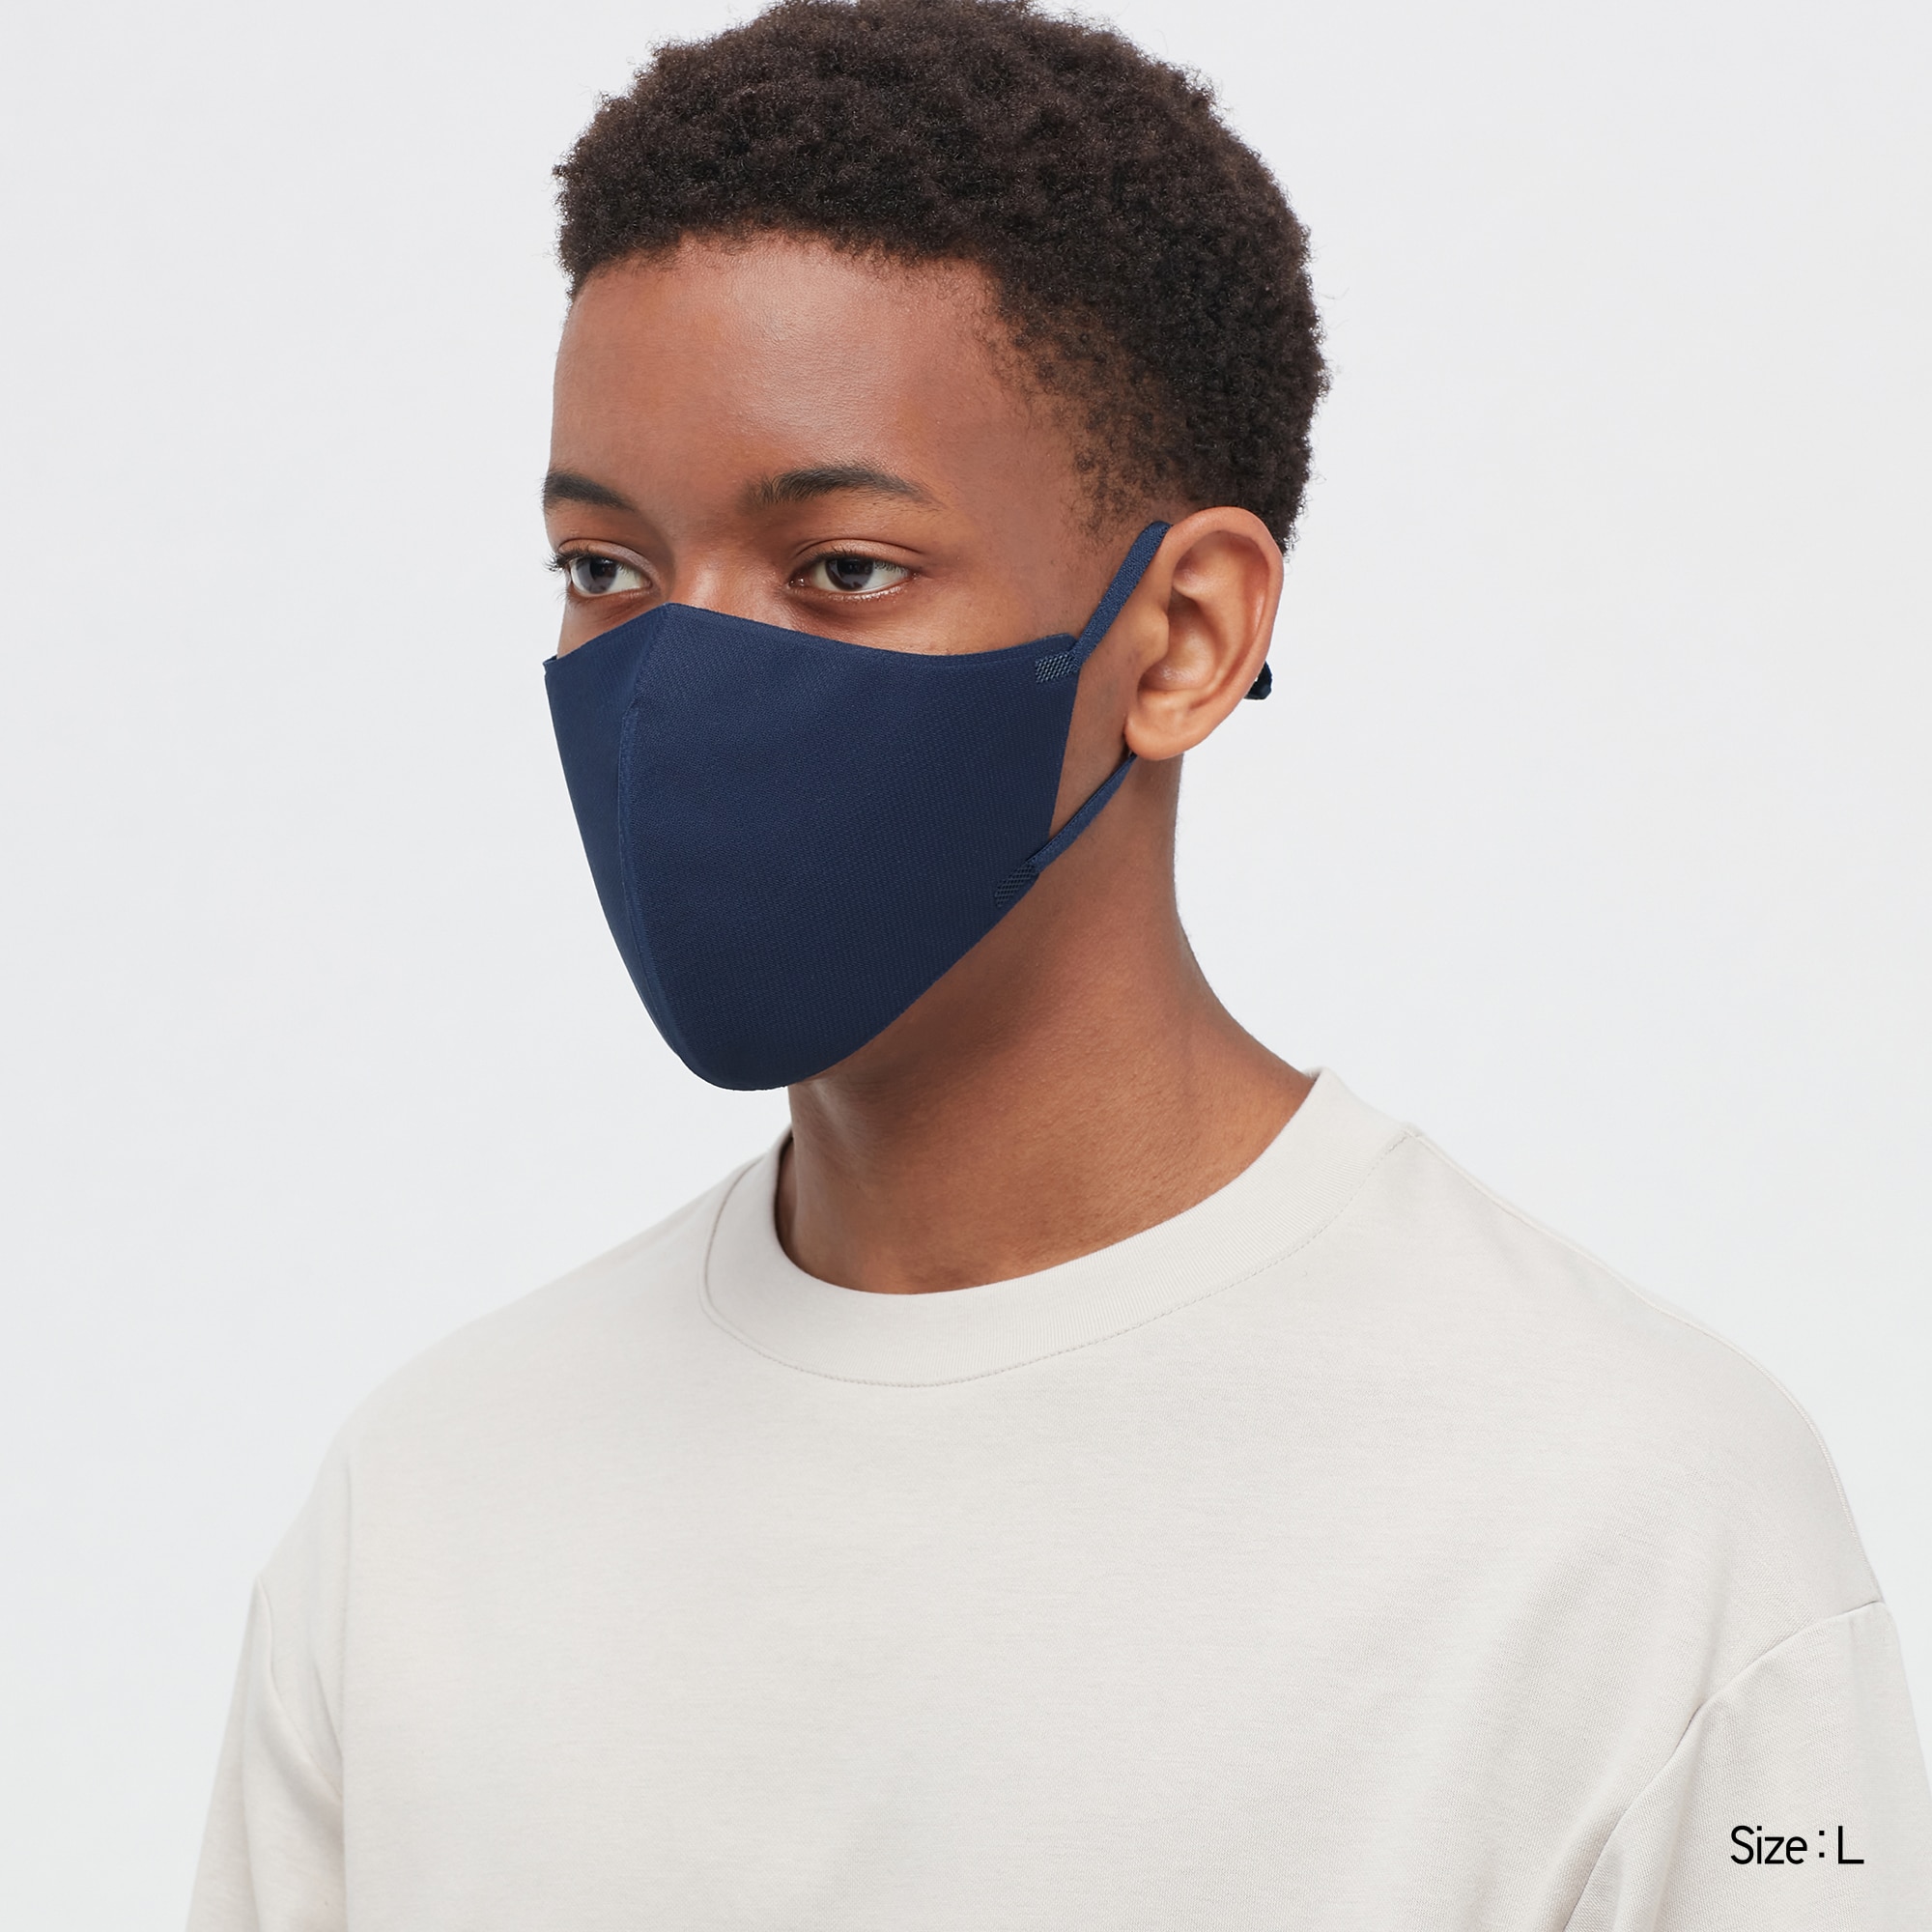 Uniqlo Face Masks Our Favorite Affordable Face Mask Just Dropped in a  Bunch of New Colors  GQ